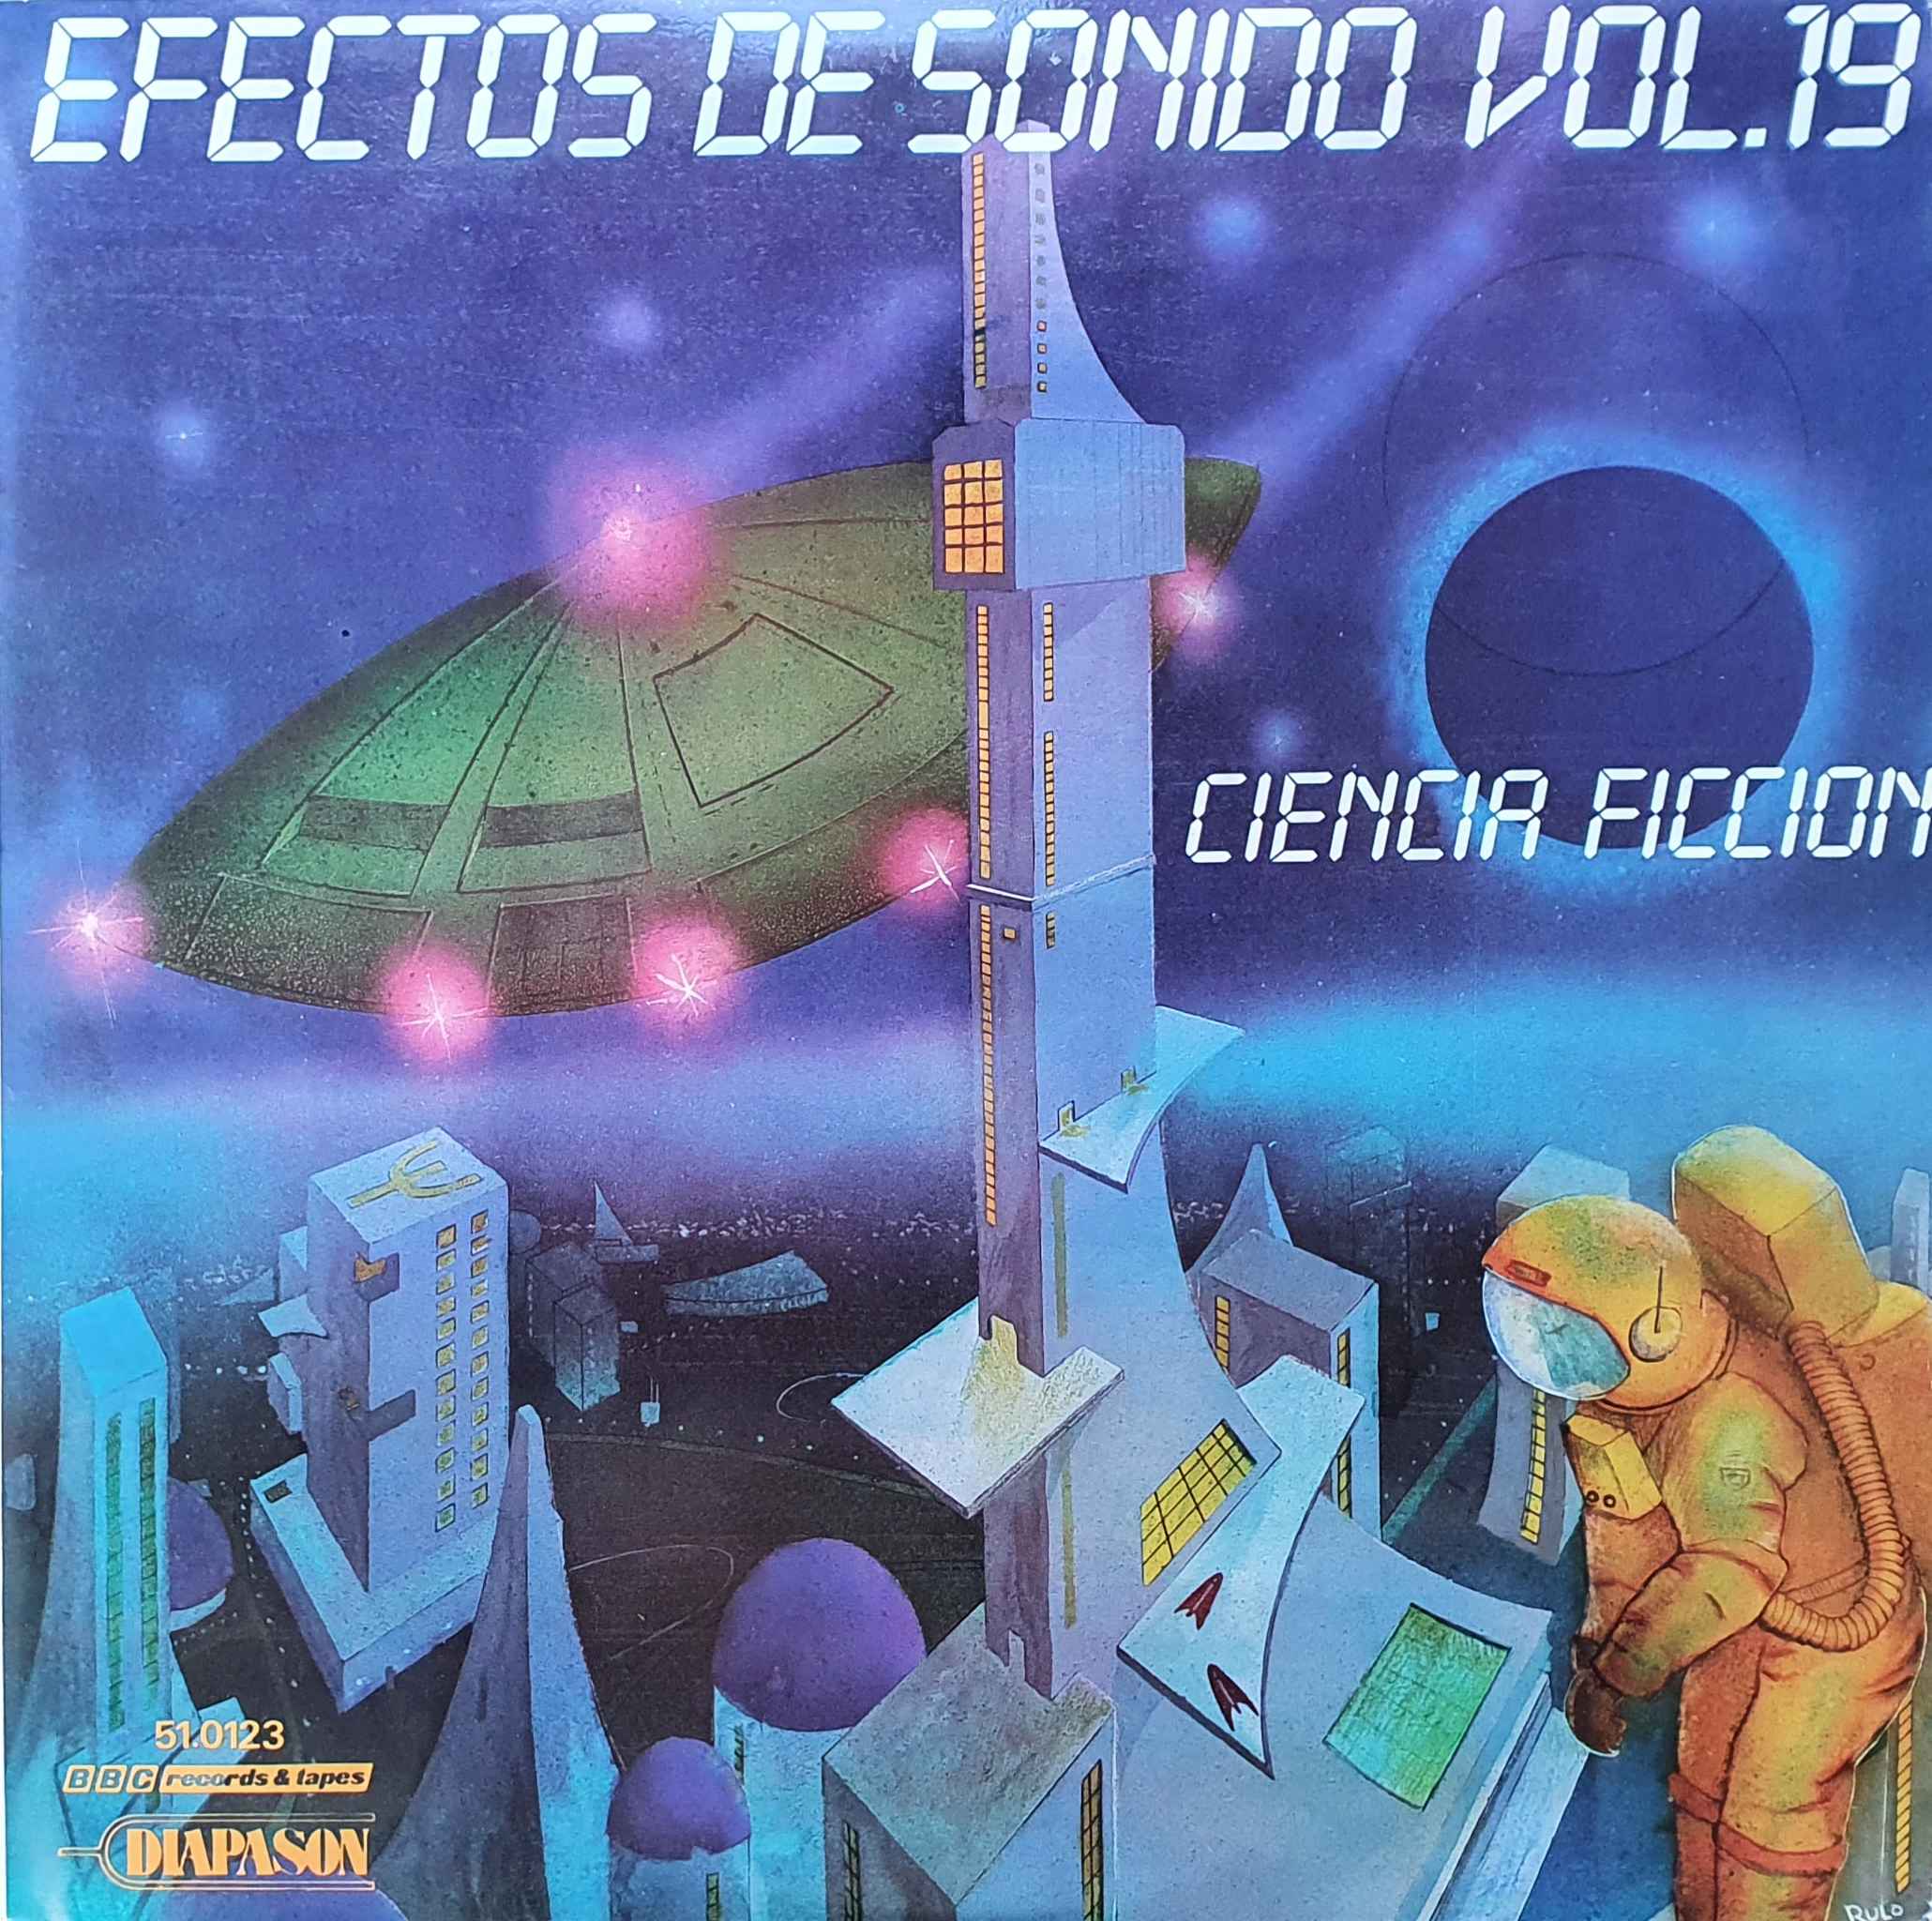 Picture of 51.0123 Efectos de sonido Vol. 19 - Ciencia Ficcion by artist Dick Mills / Brian Hodgson from the BBC albums - Records and Tapes library